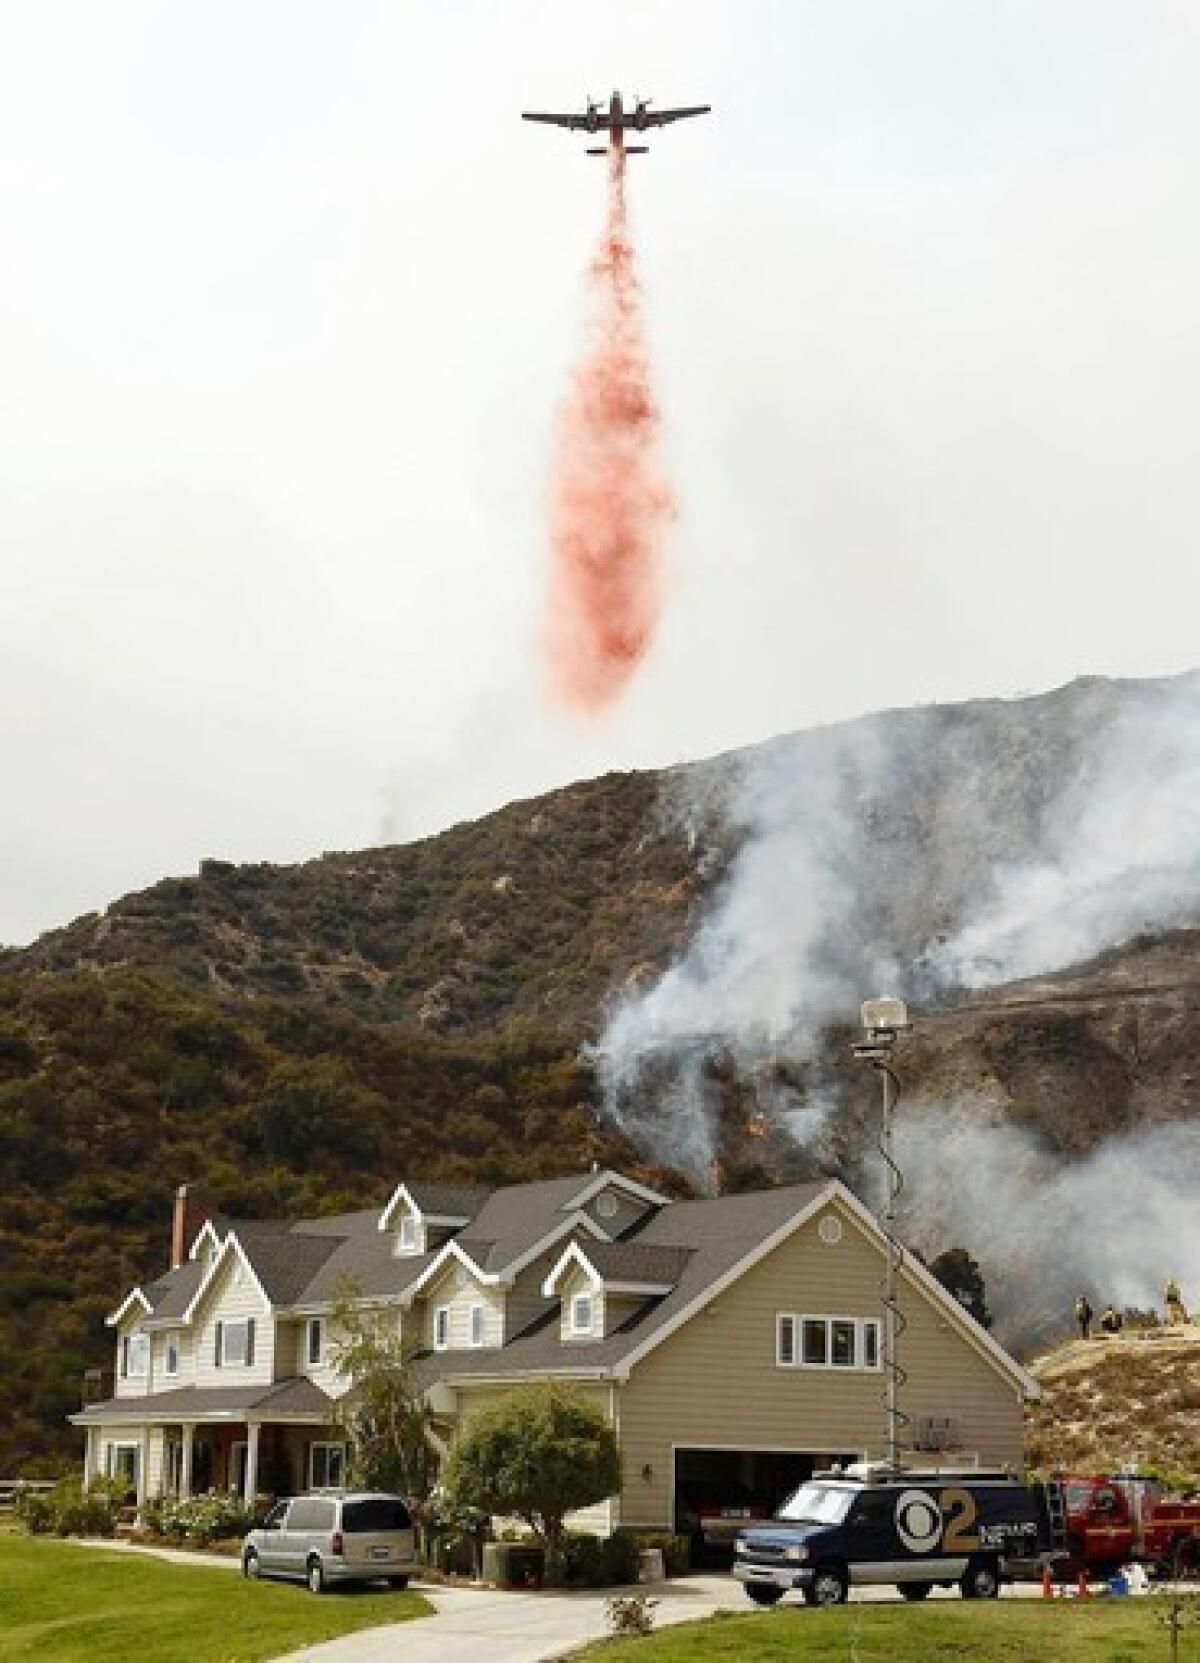 An airplane drops fire retardant on flames in the hills above La Cañada Flintridge in 2009. Slightly more than half of the homes at high risk from wildfire are in Southern California, a study found.